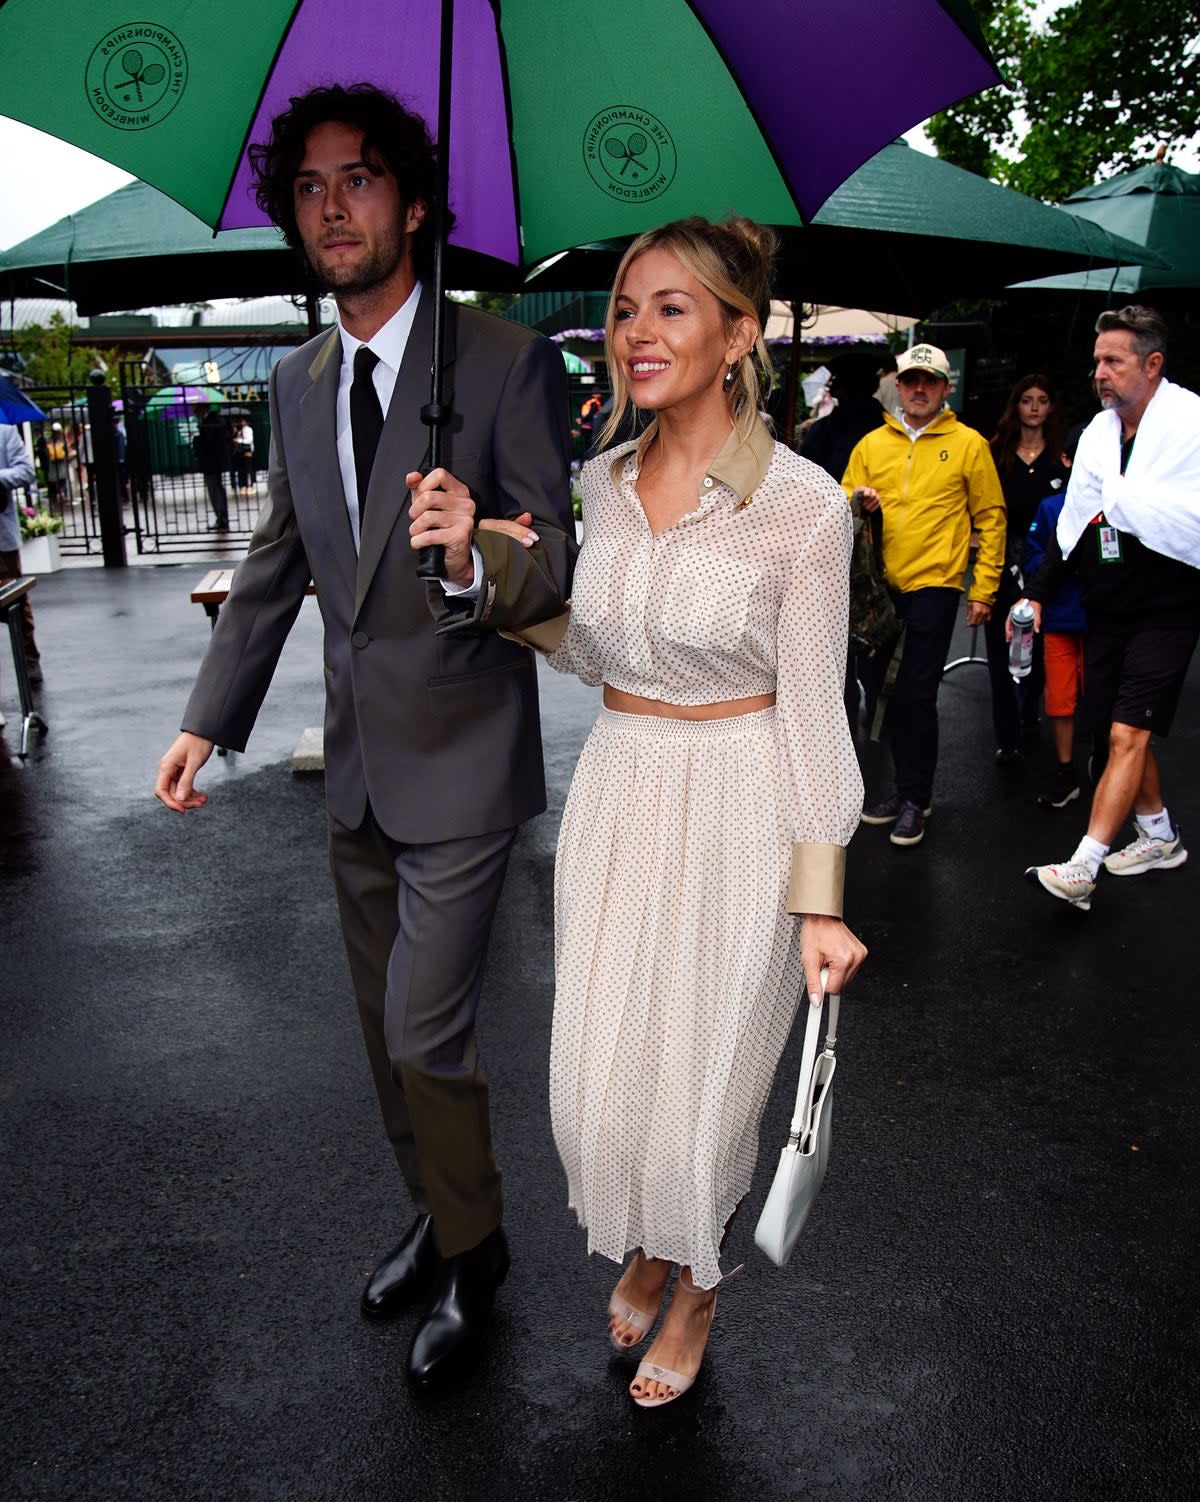 Actress Sienna Miller arrives at Wimbledon with partner Oli Green (Aaron Chown/PA Wire)